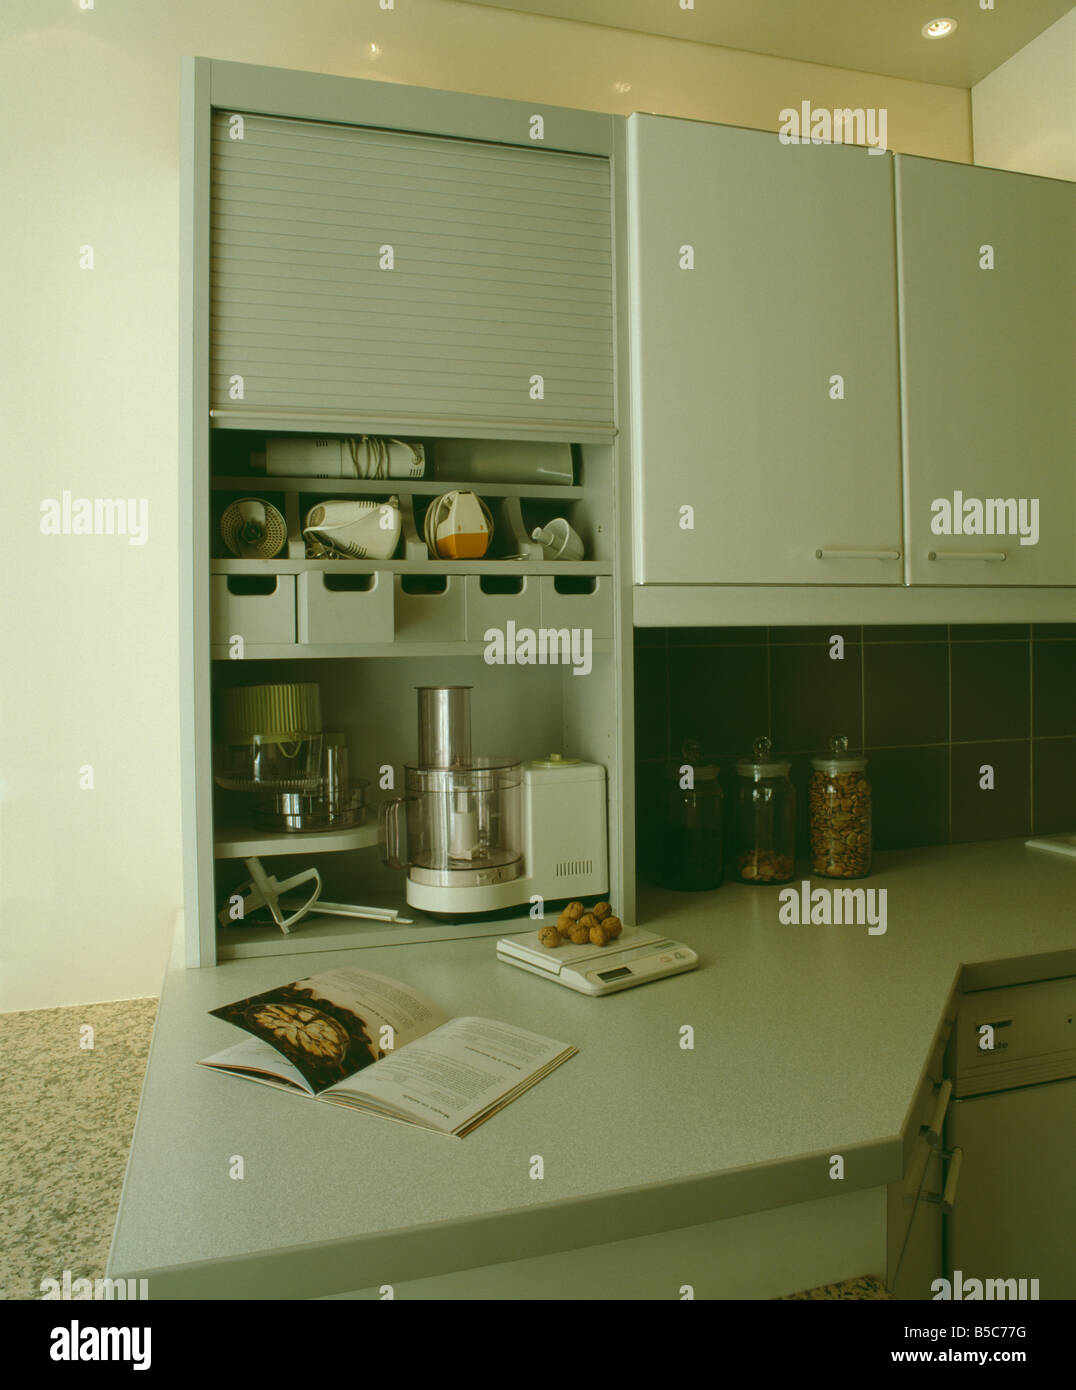 Electric food mixer and processor and storage shelves in kitchen unit with tambour shutter Stock Photo